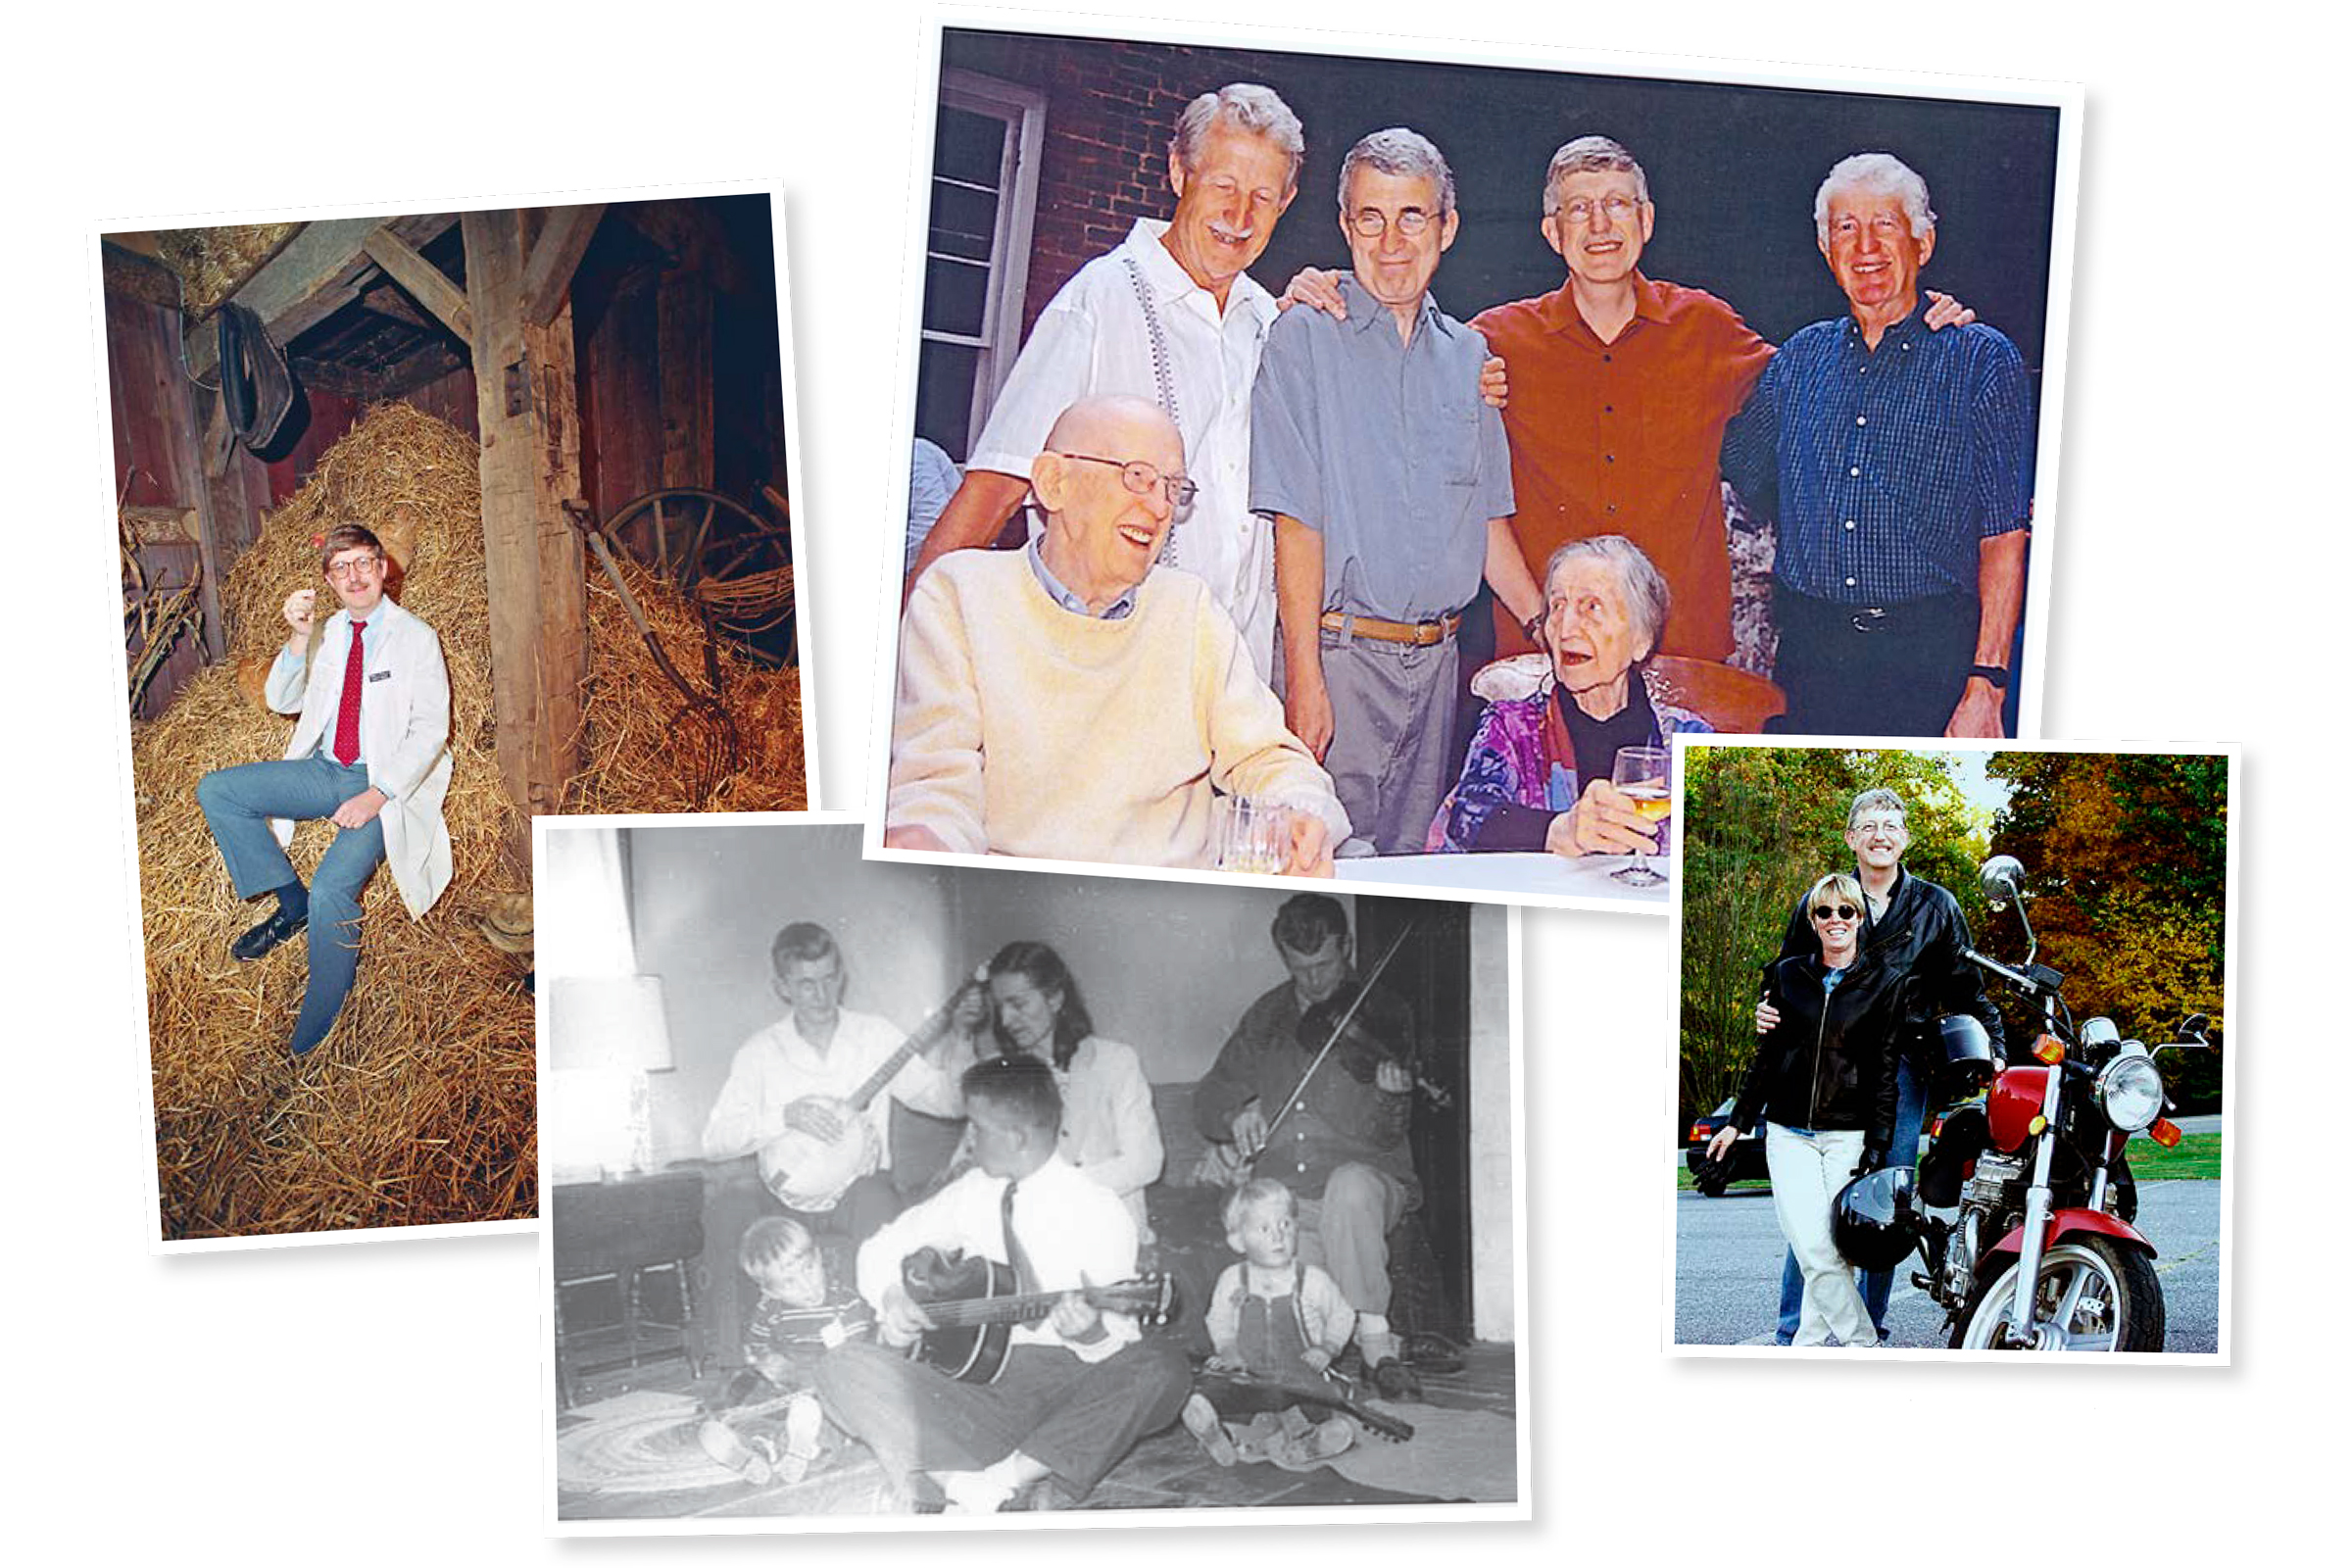 From left: Collins illustrating the challenge of gene hunting in 1989; with family in 1951 and 2003; with his second wife Diane Baker in 2004